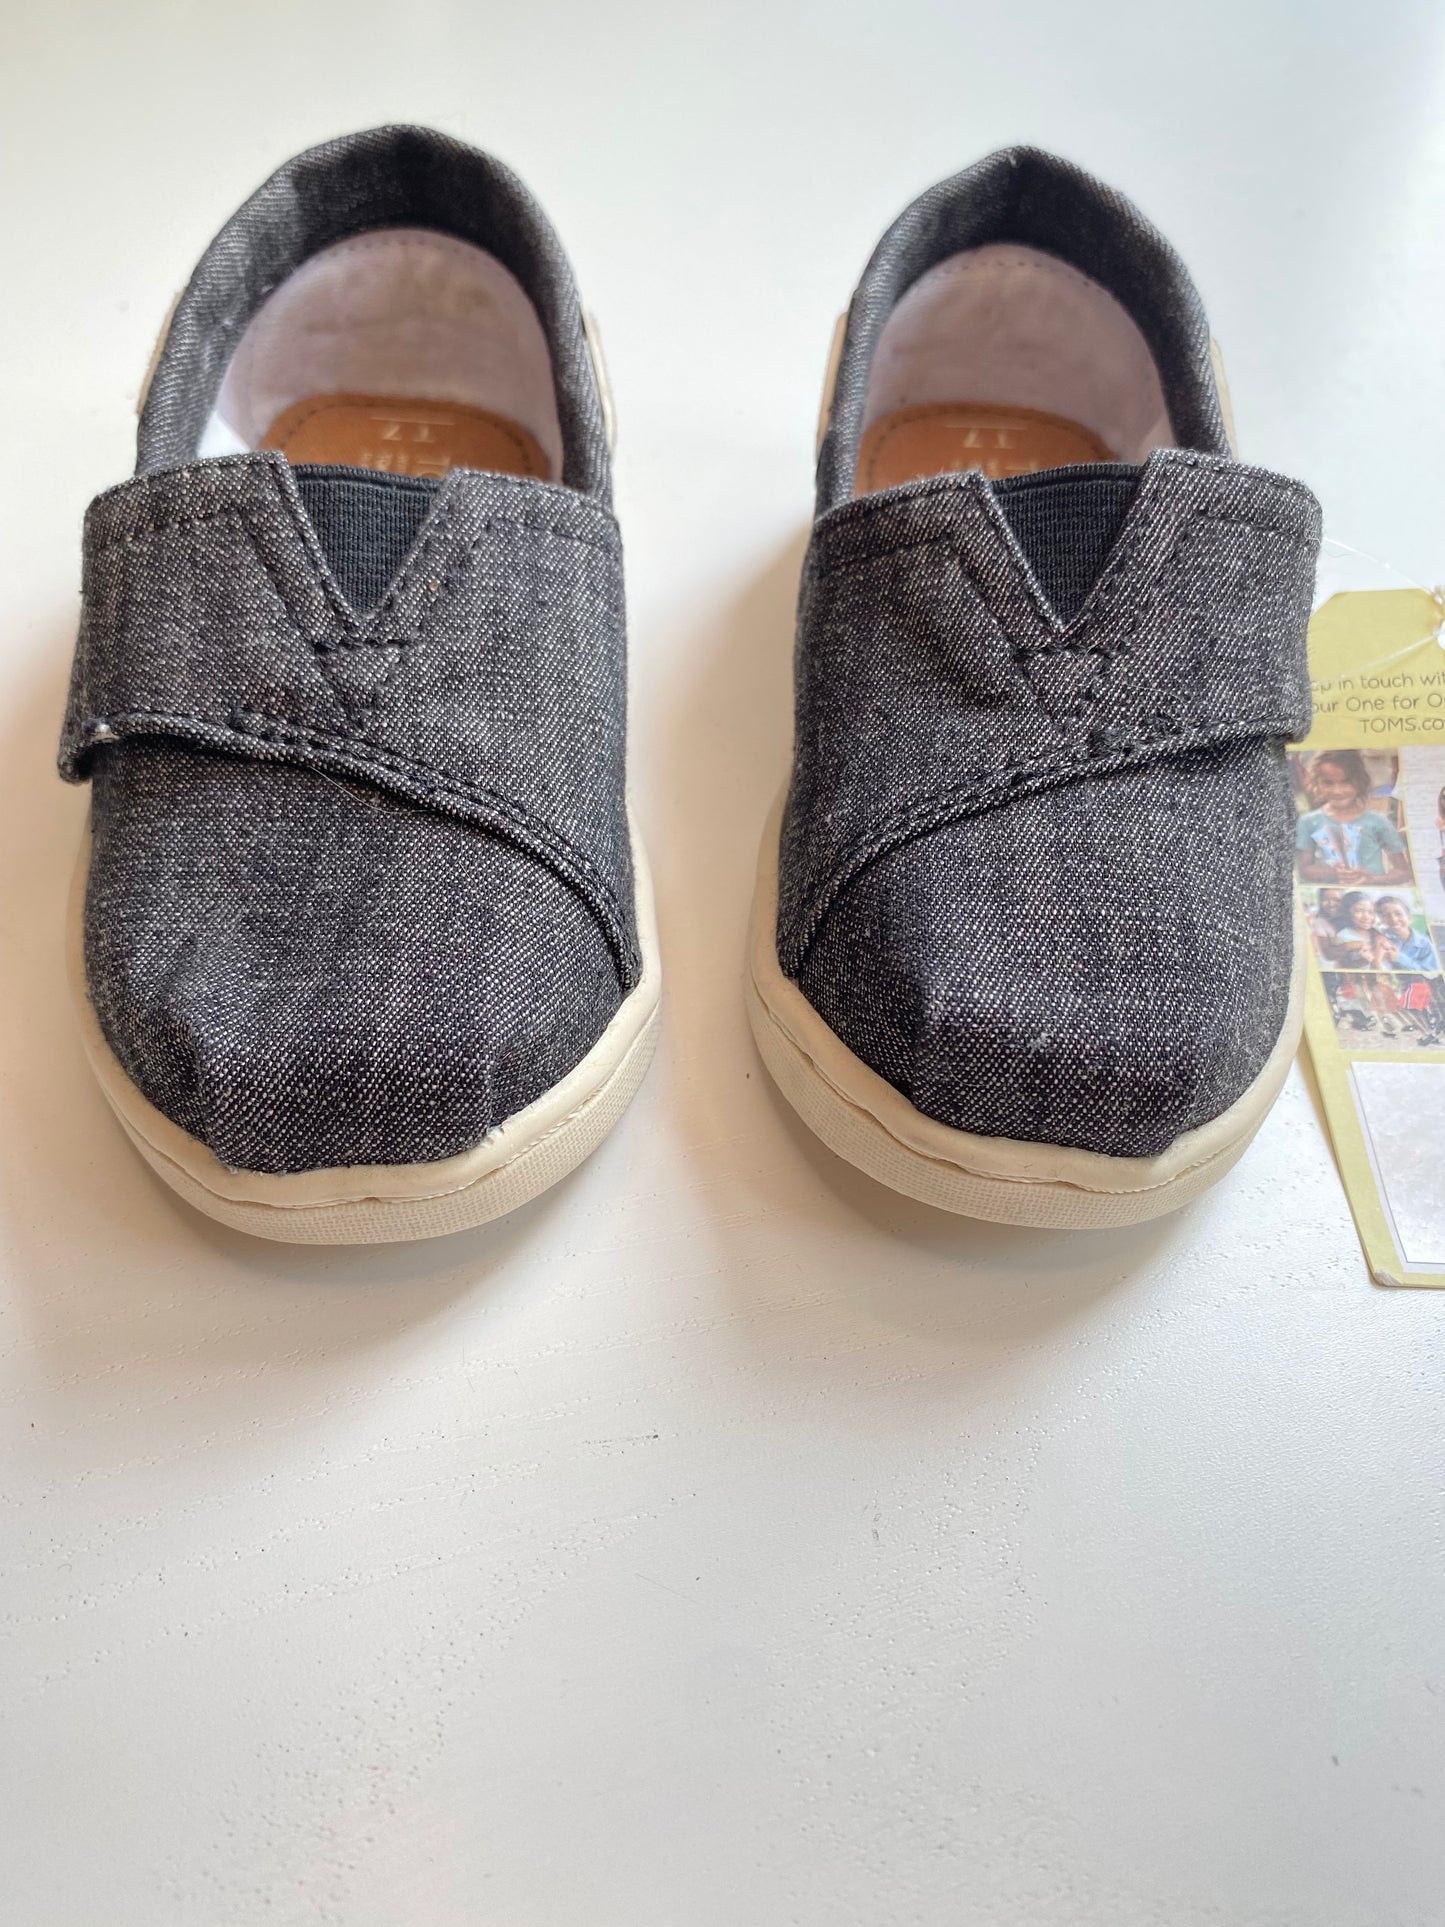 TOMS Summer Canva Velcro Shoes NWT / US7 - 23.5